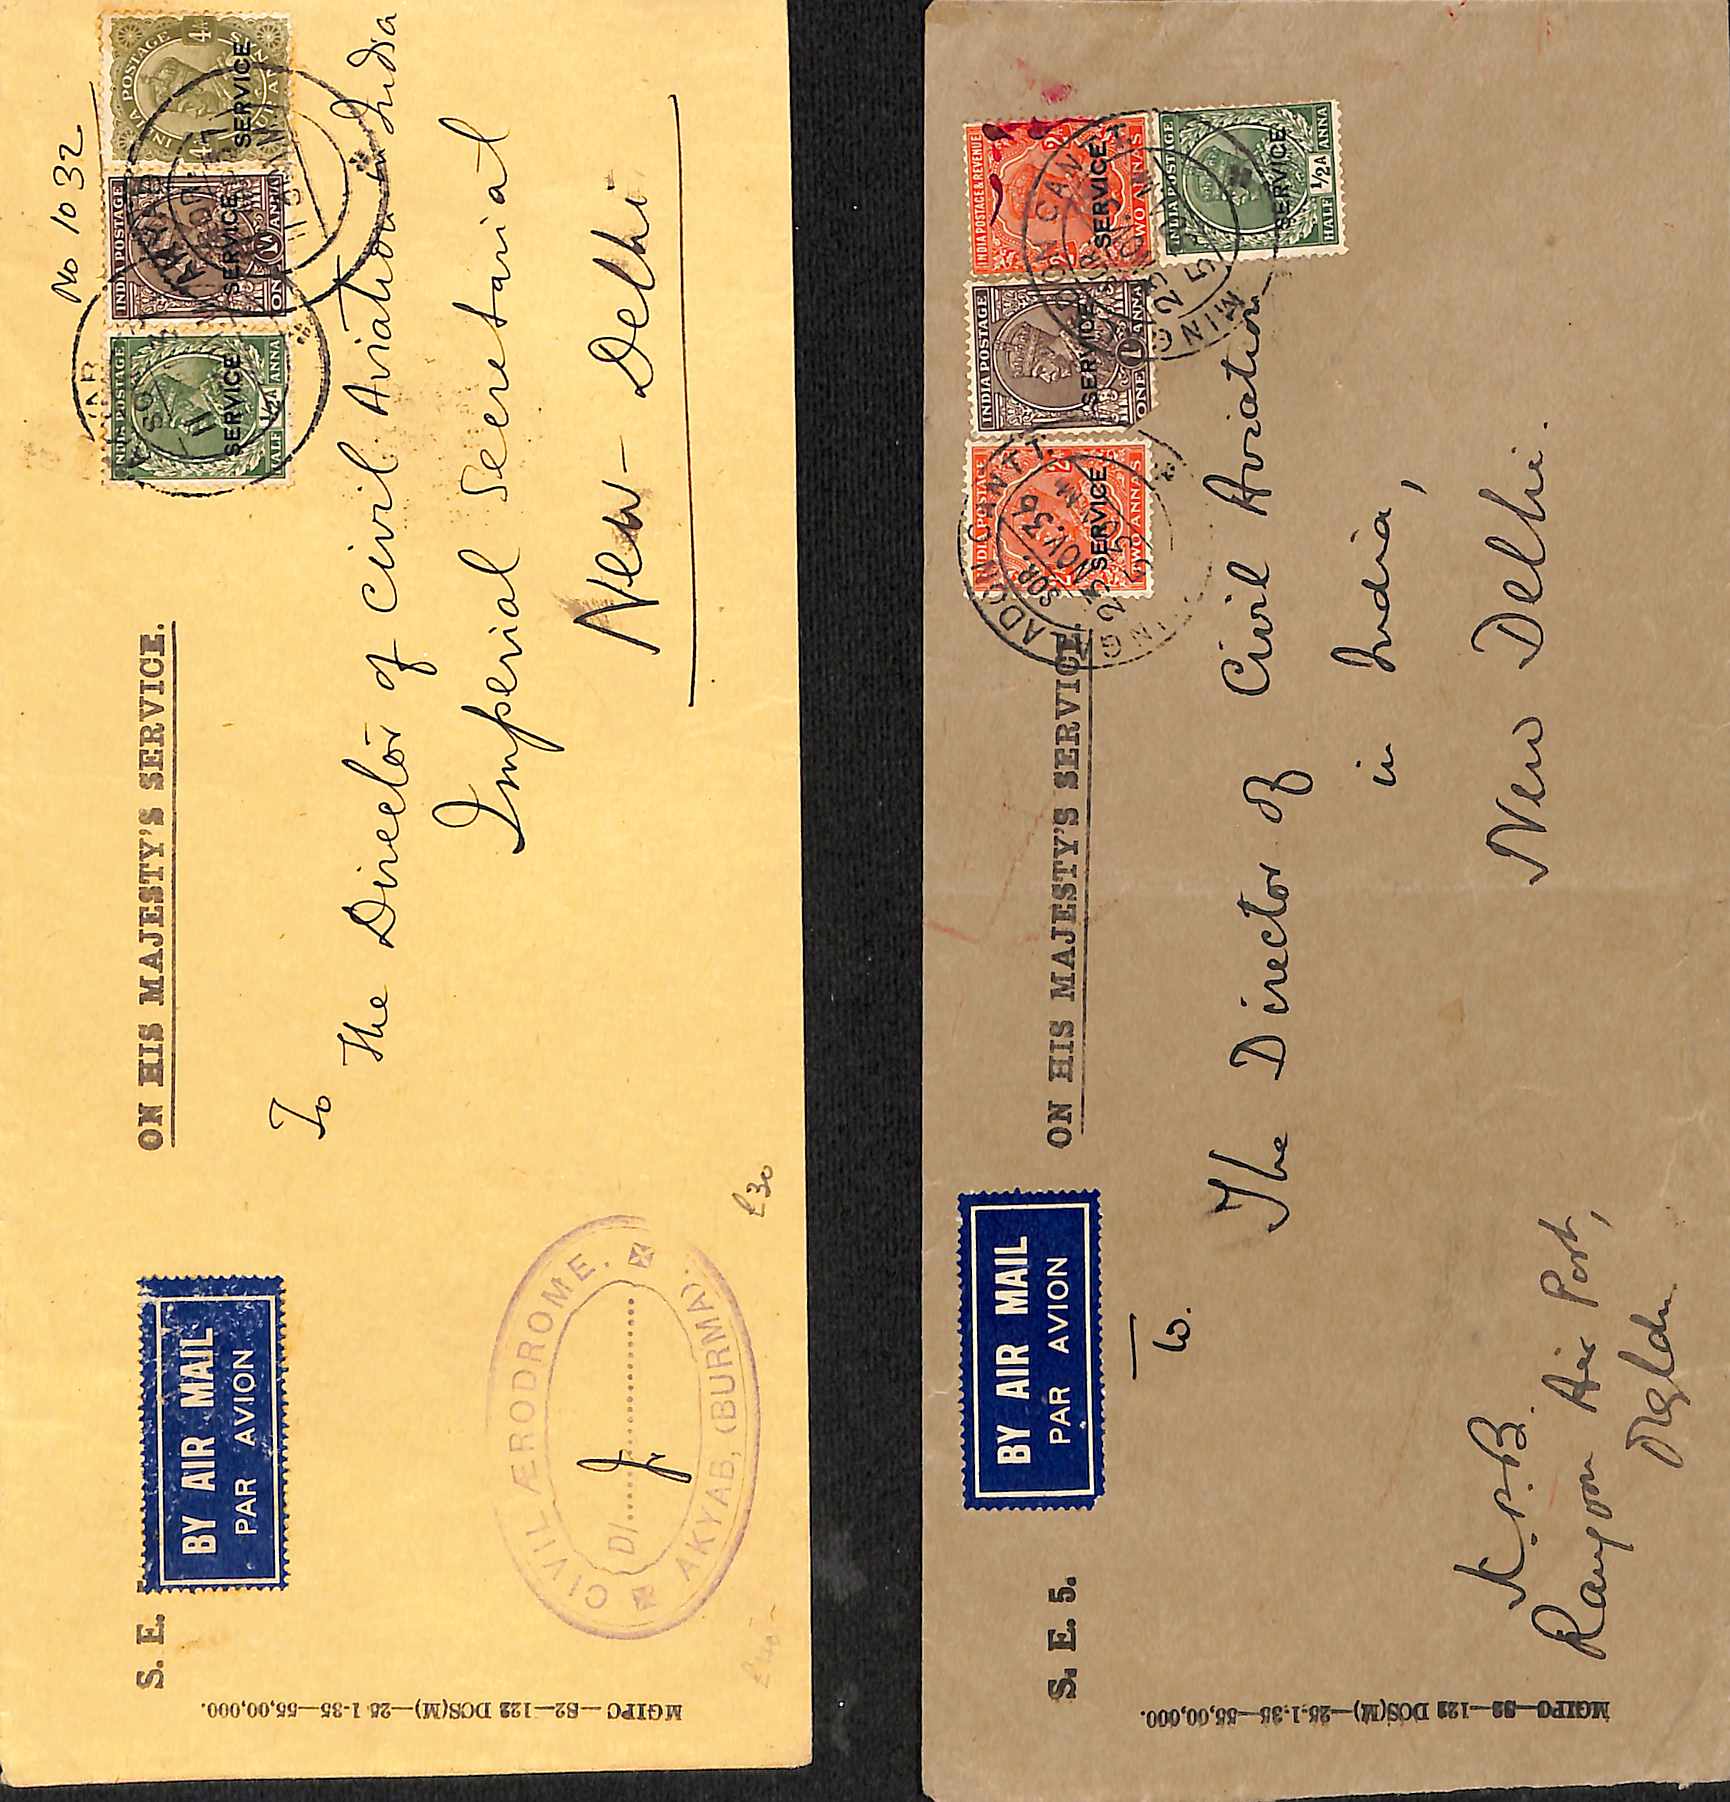 1936-9 Long Official covers sent by air to the Director of Civil Aviation in New Delhi (5) or to - Image 5 of 6